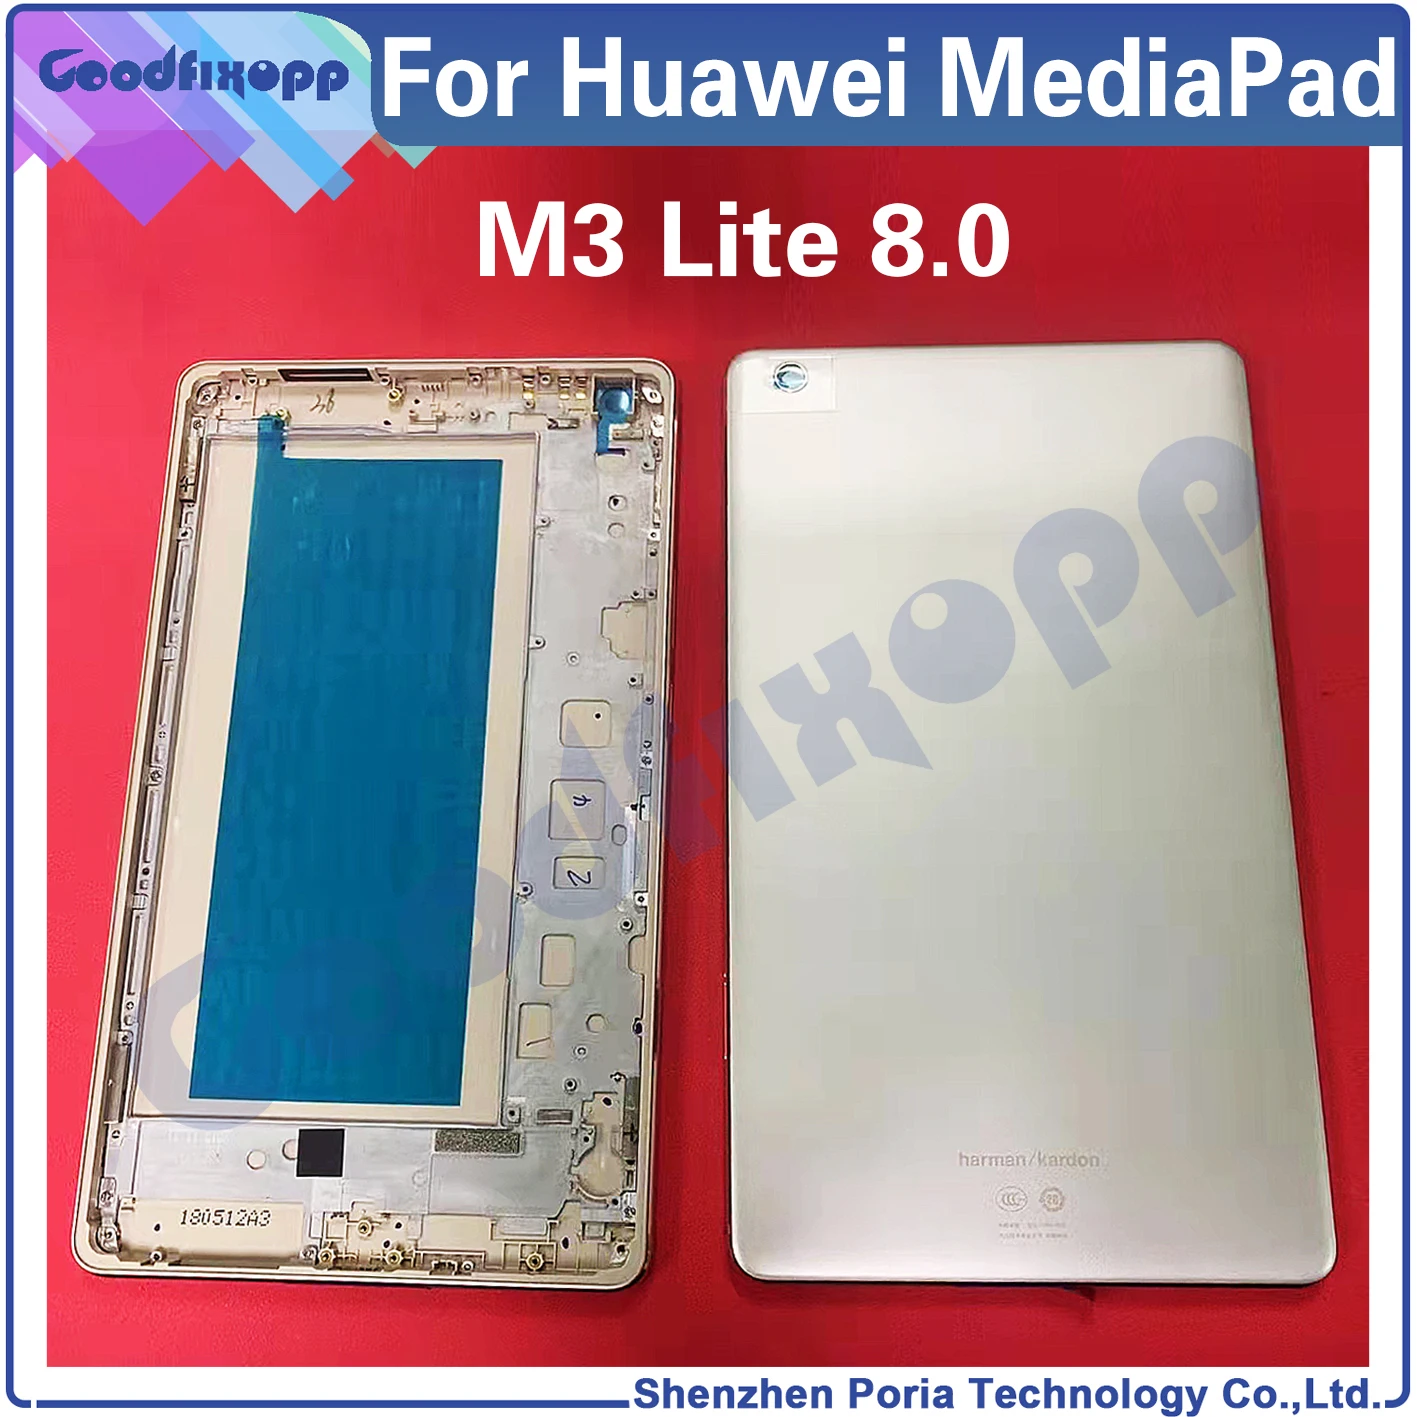 For Huawei MediaPad M3 Lite 8 Wi-Fi CPN-W09 M3Lite Wi-fi / 4G CPN-AL00 Battery Back Cover Rear Case Cover Rear Lid Parts Replace